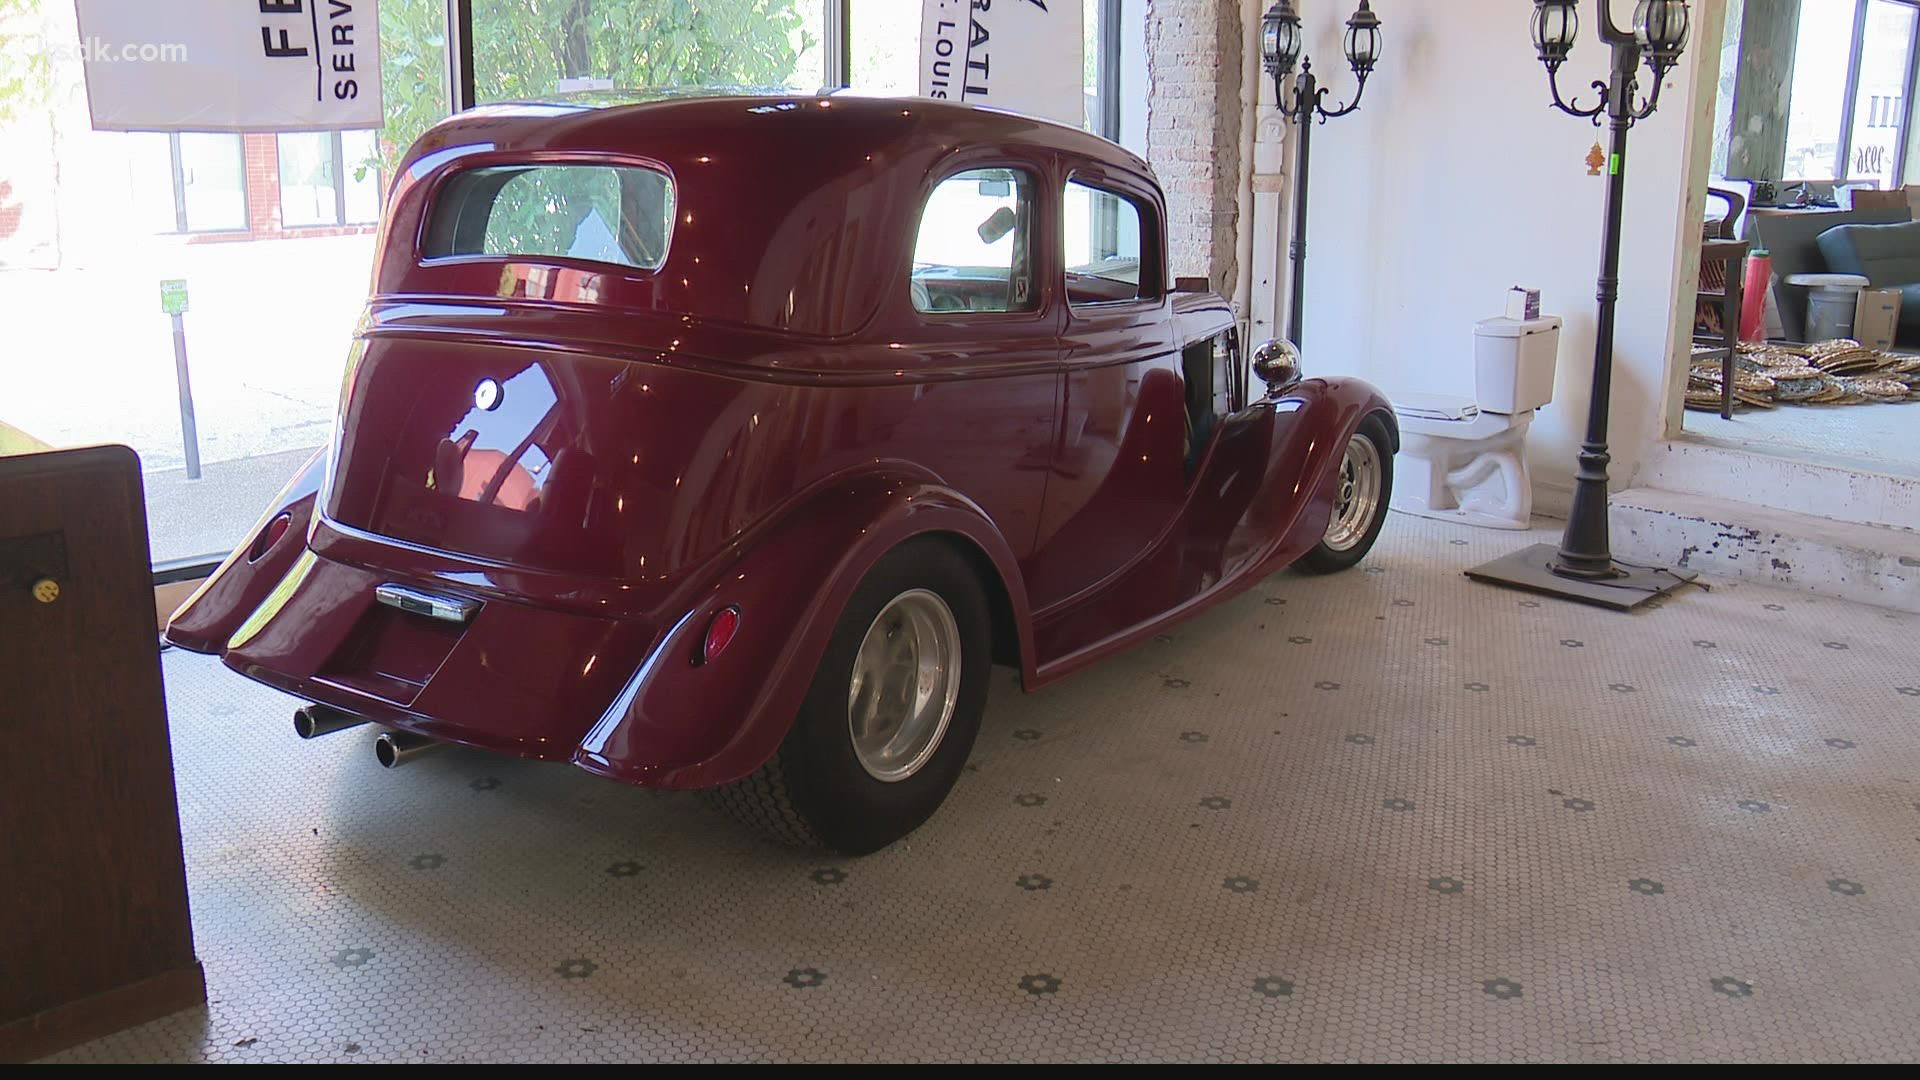 There's a revival of sorts coming to St. Louis. Cars from days gone by are coming back to life at a new garage.